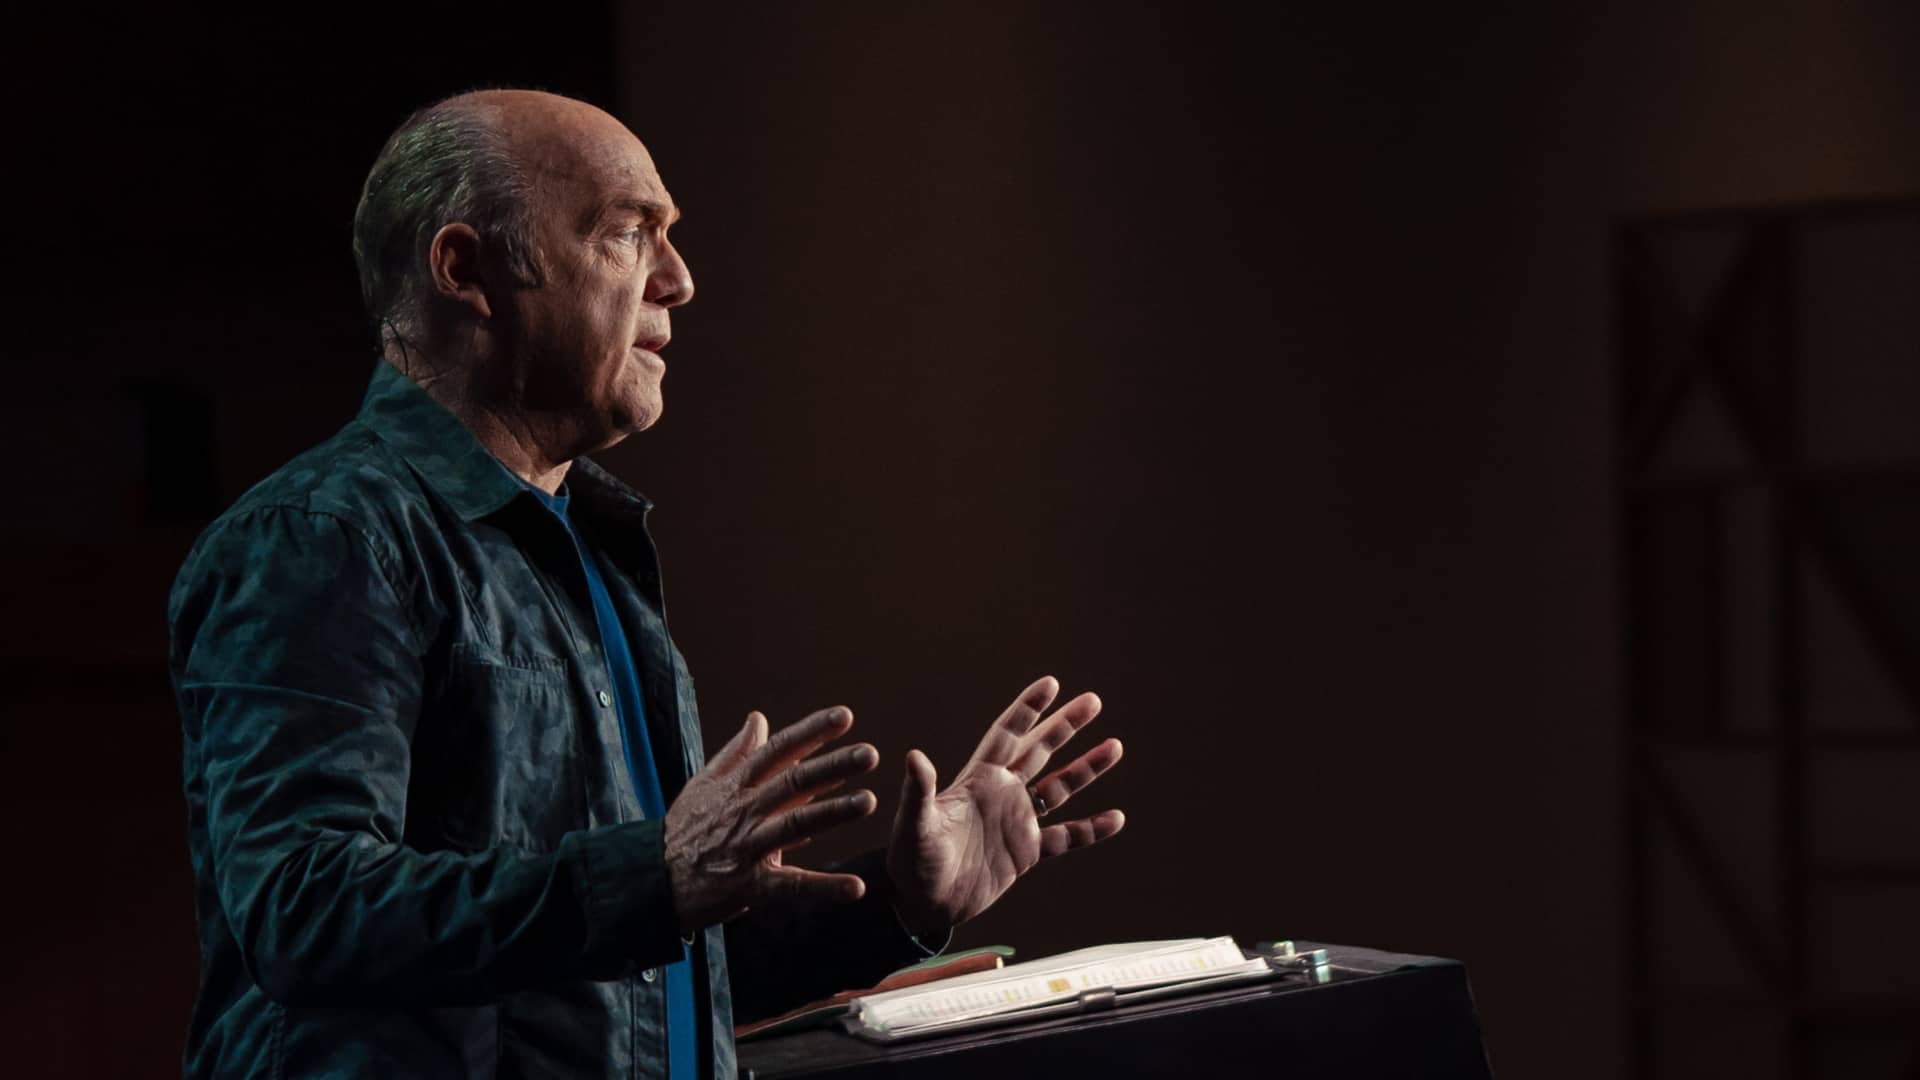 Pastor Greg Laurie preaches at a pulpit